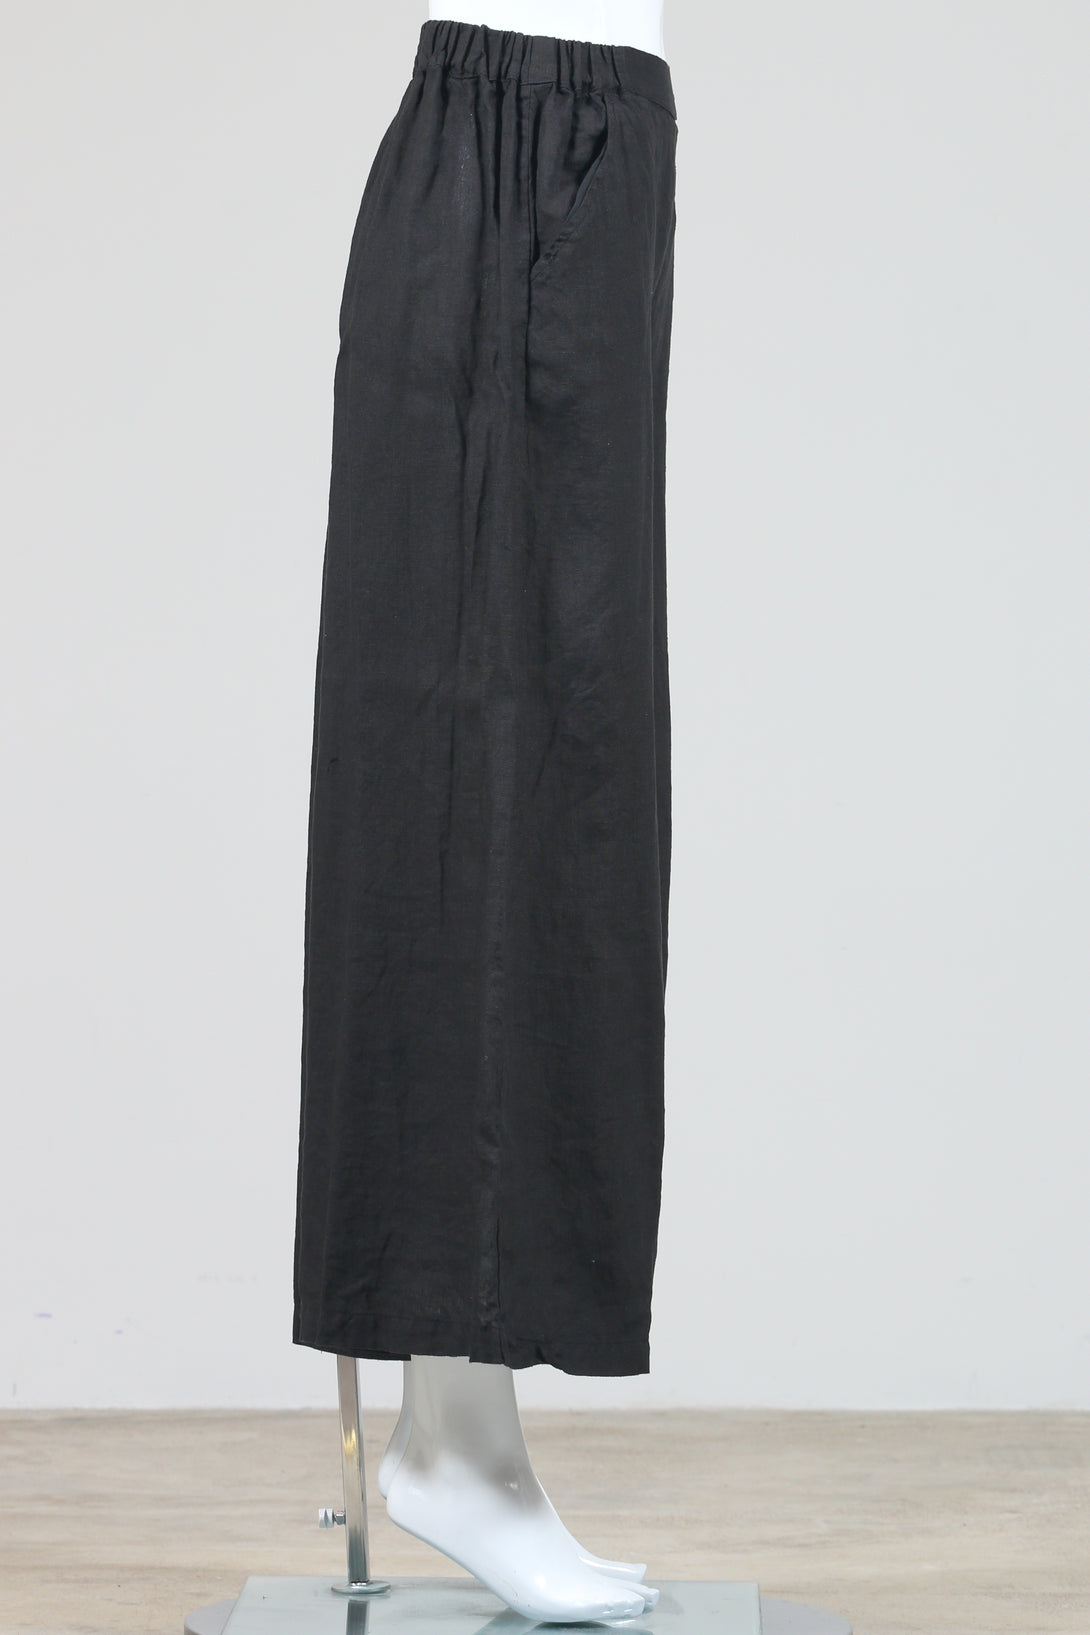 CP Shades Wendy Pant ﻿is a long pant with extra wide leg and banded flat front waist with an elastic back.